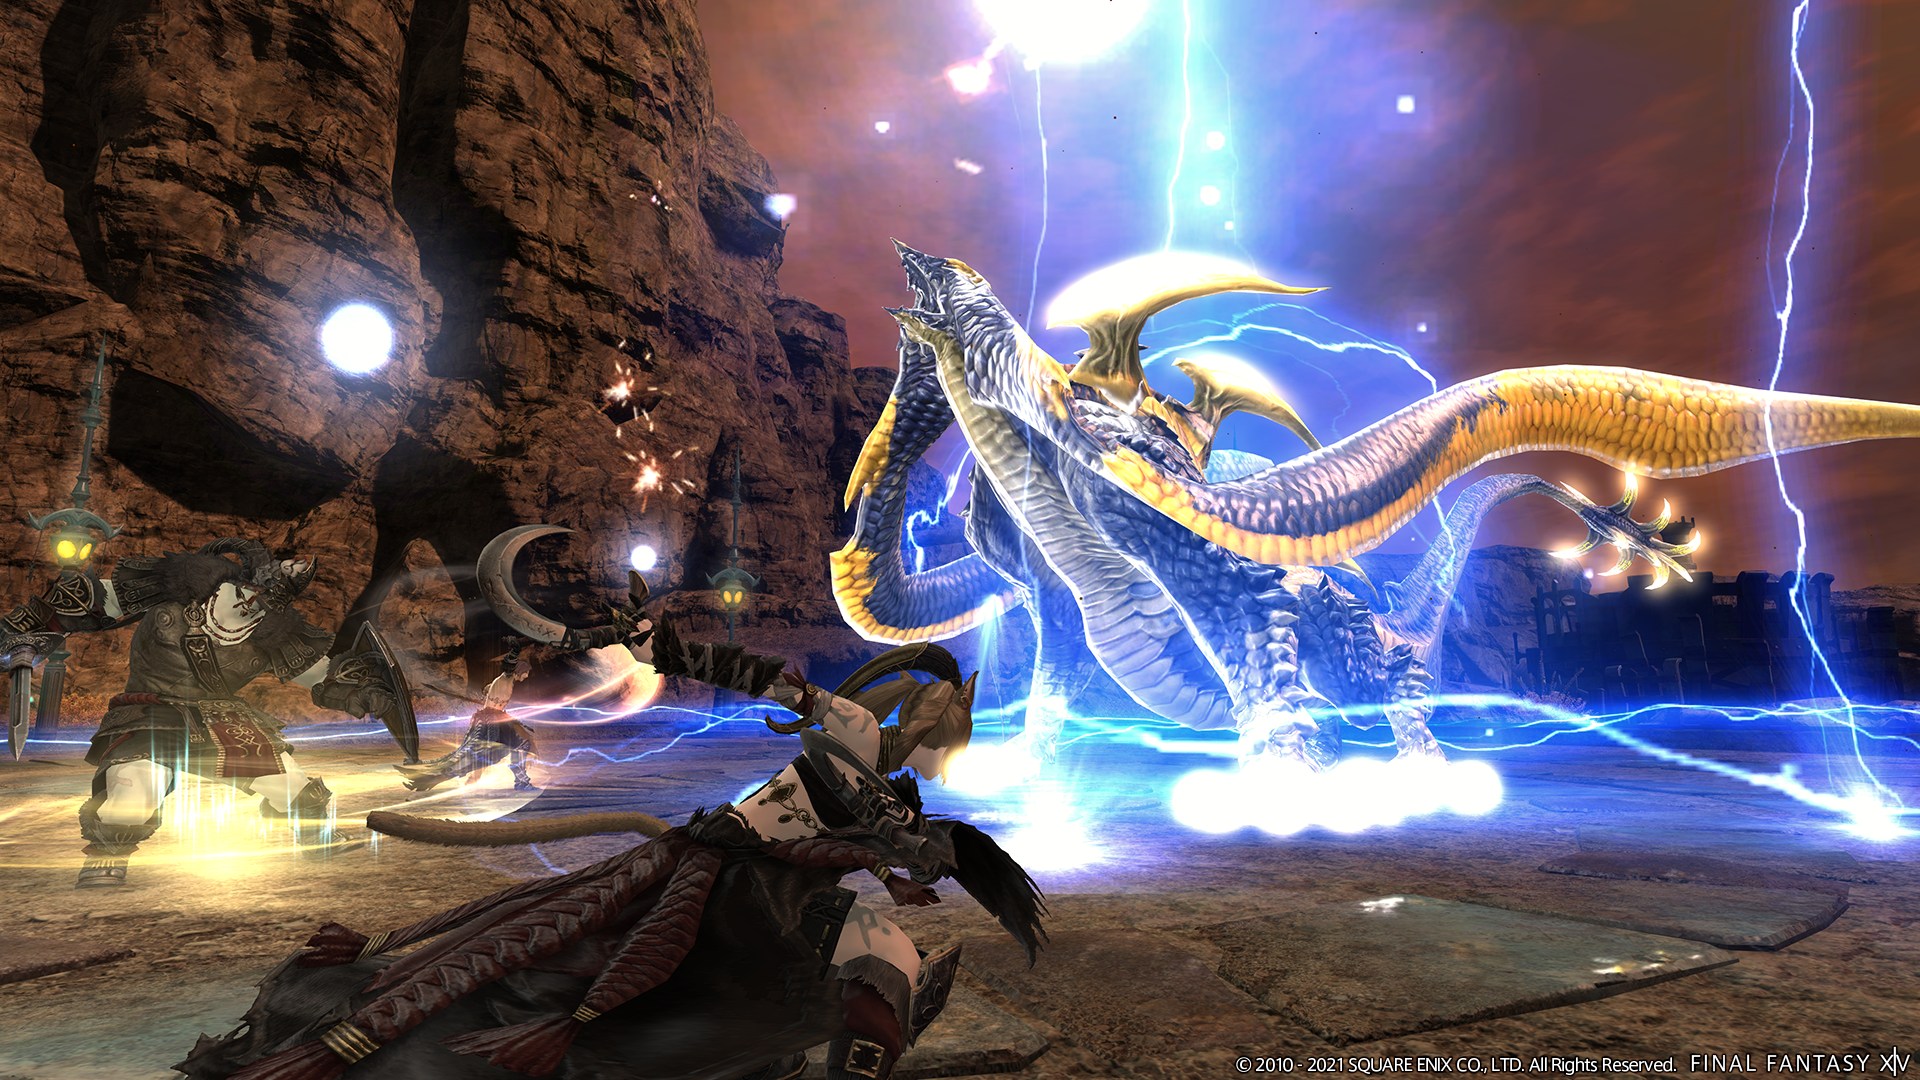 Final Fantasy 14 characters attacking an enemy with lightning